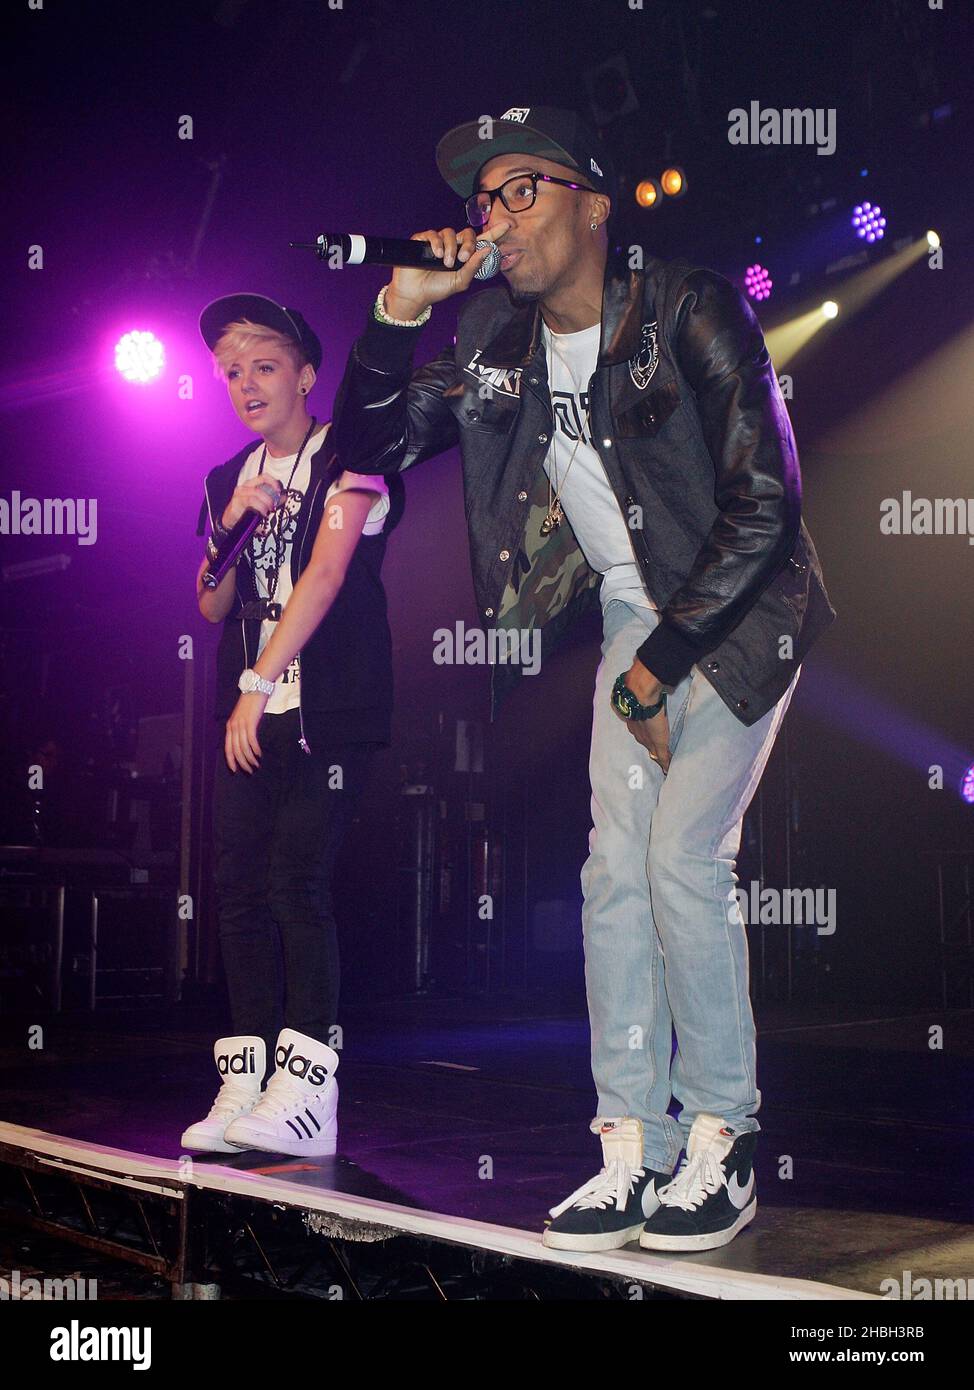 Charlotte Rundle and Simeon Dixon of MK1 supporting JLS performing at G-A-Y Heaven in London. Stock Photo